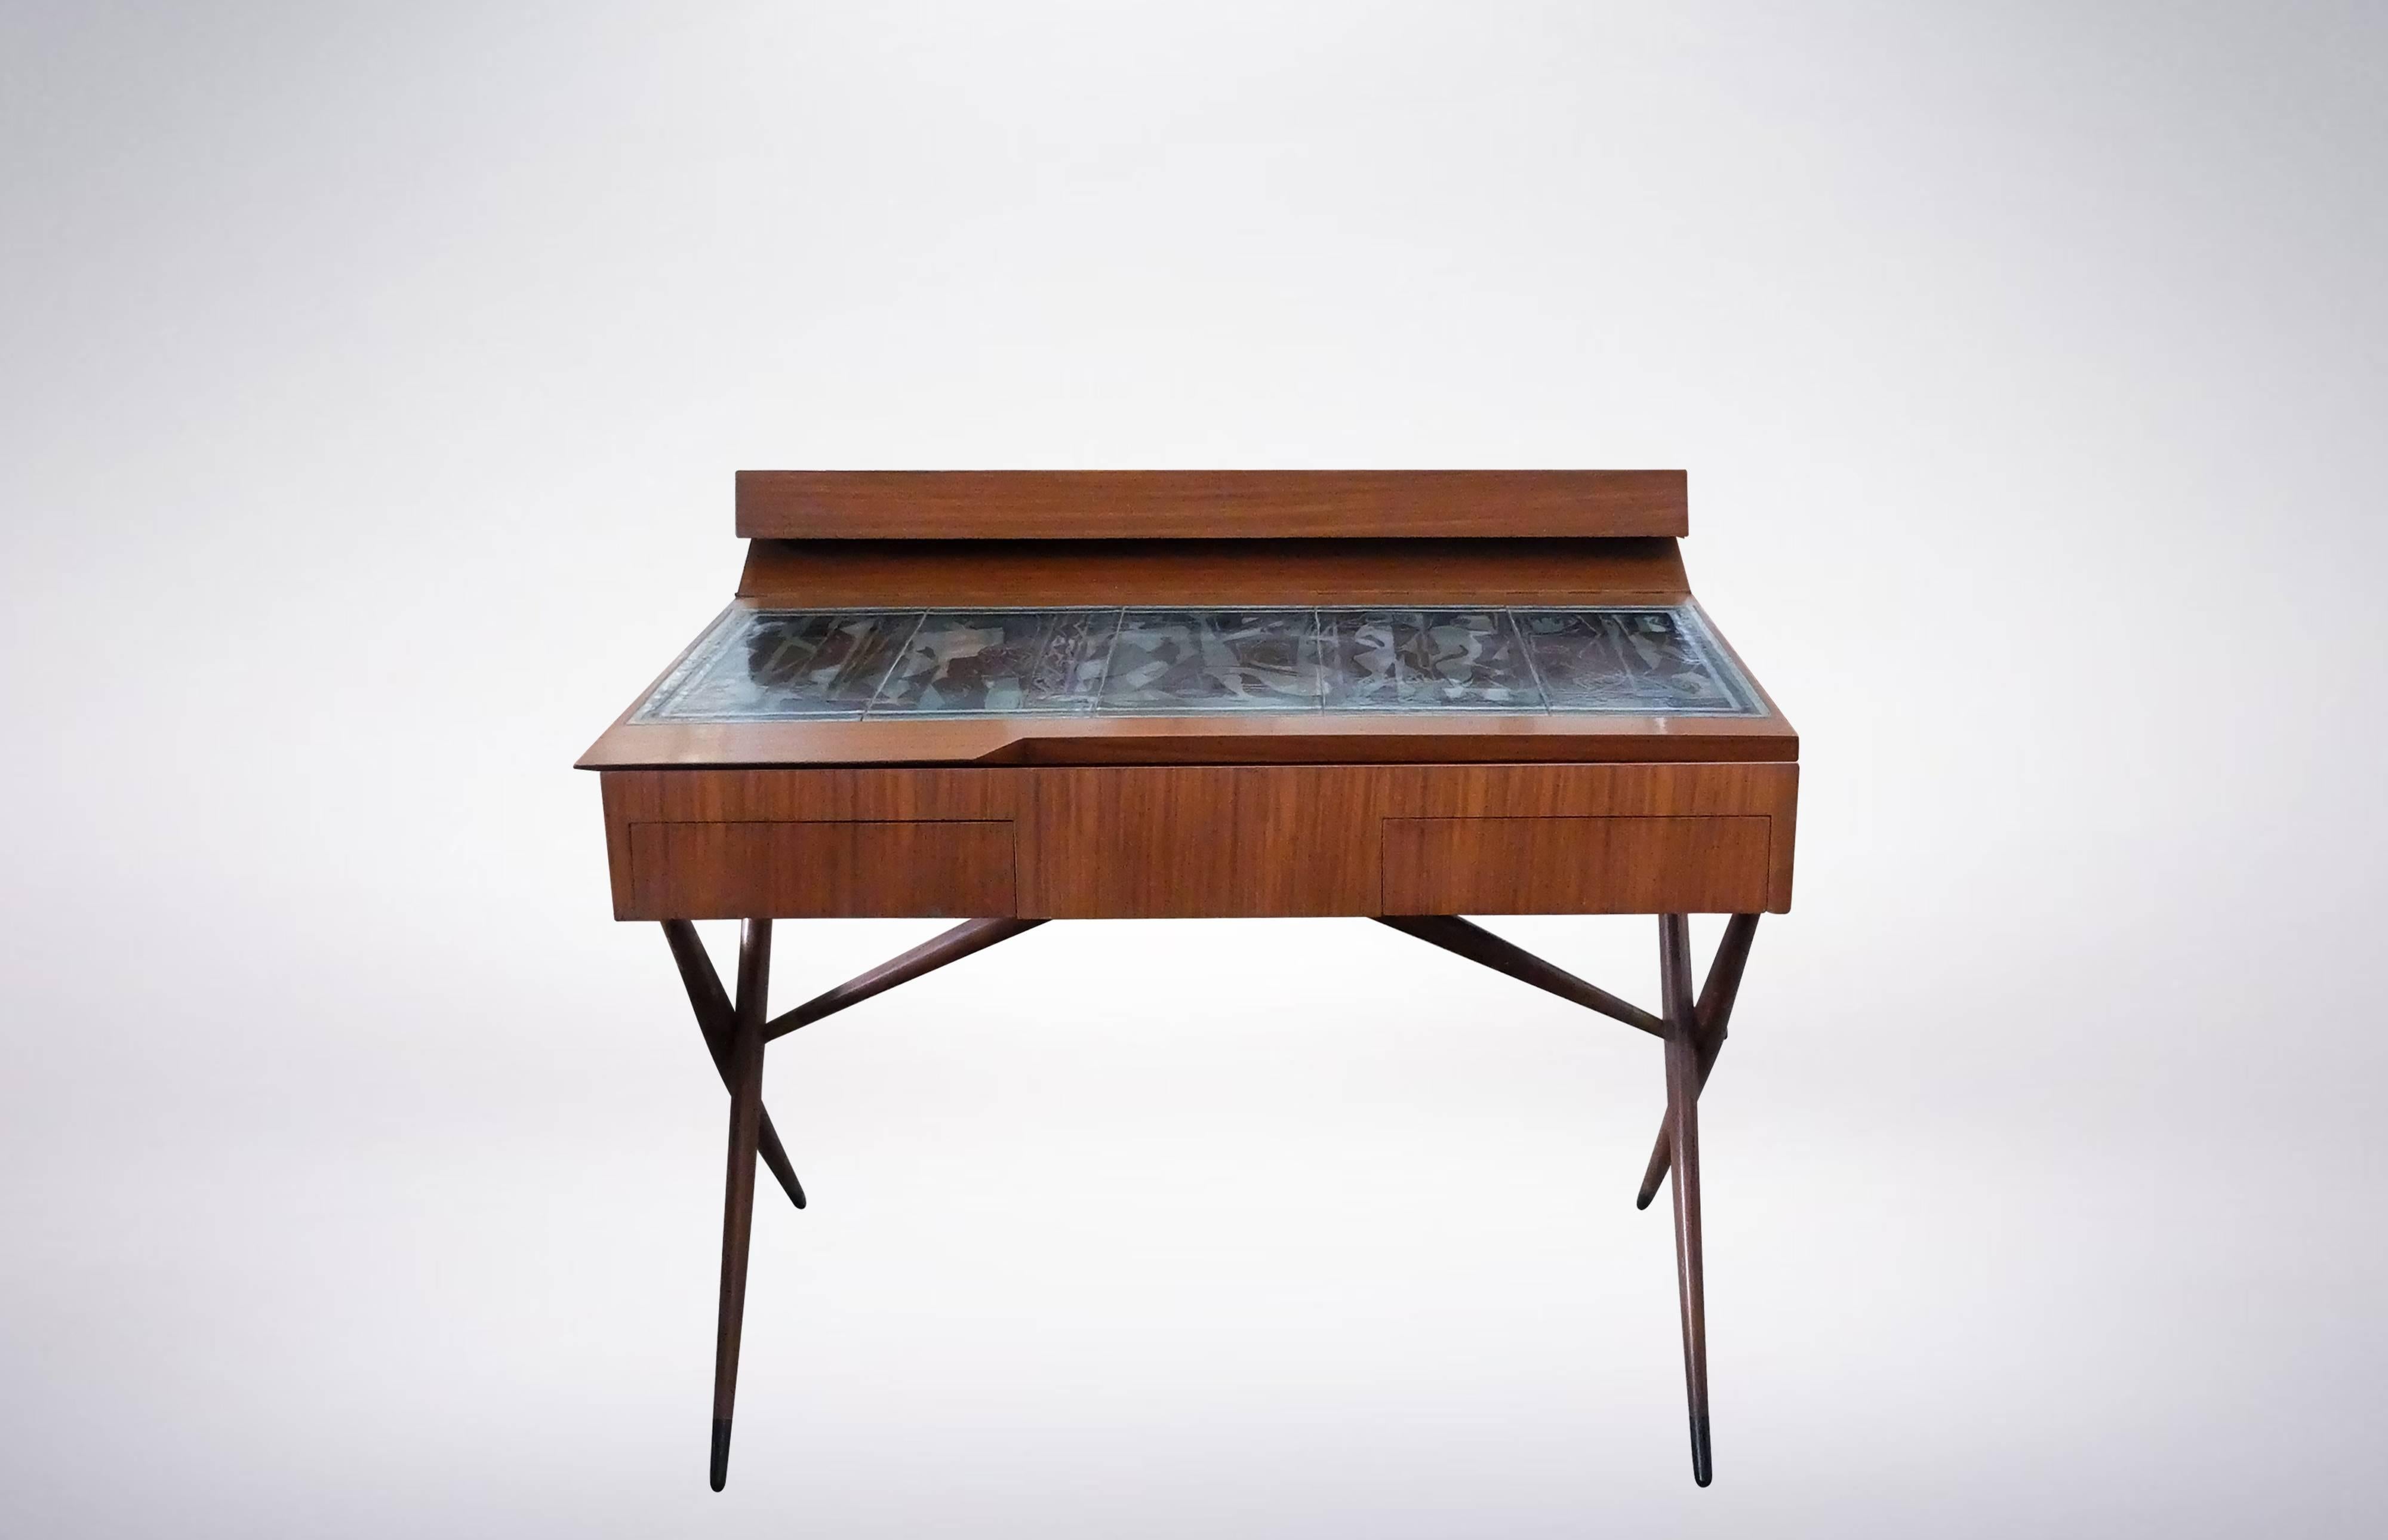 Dresser with open-top stowaway, designed by Ico & Luisa Parisi for Altamira in 1942. 
The table-top was realized in enameled copper by Paolo de Poli based on the designs of Pietro Zuffi. 
The top opens to expose storage space, and was decorated with